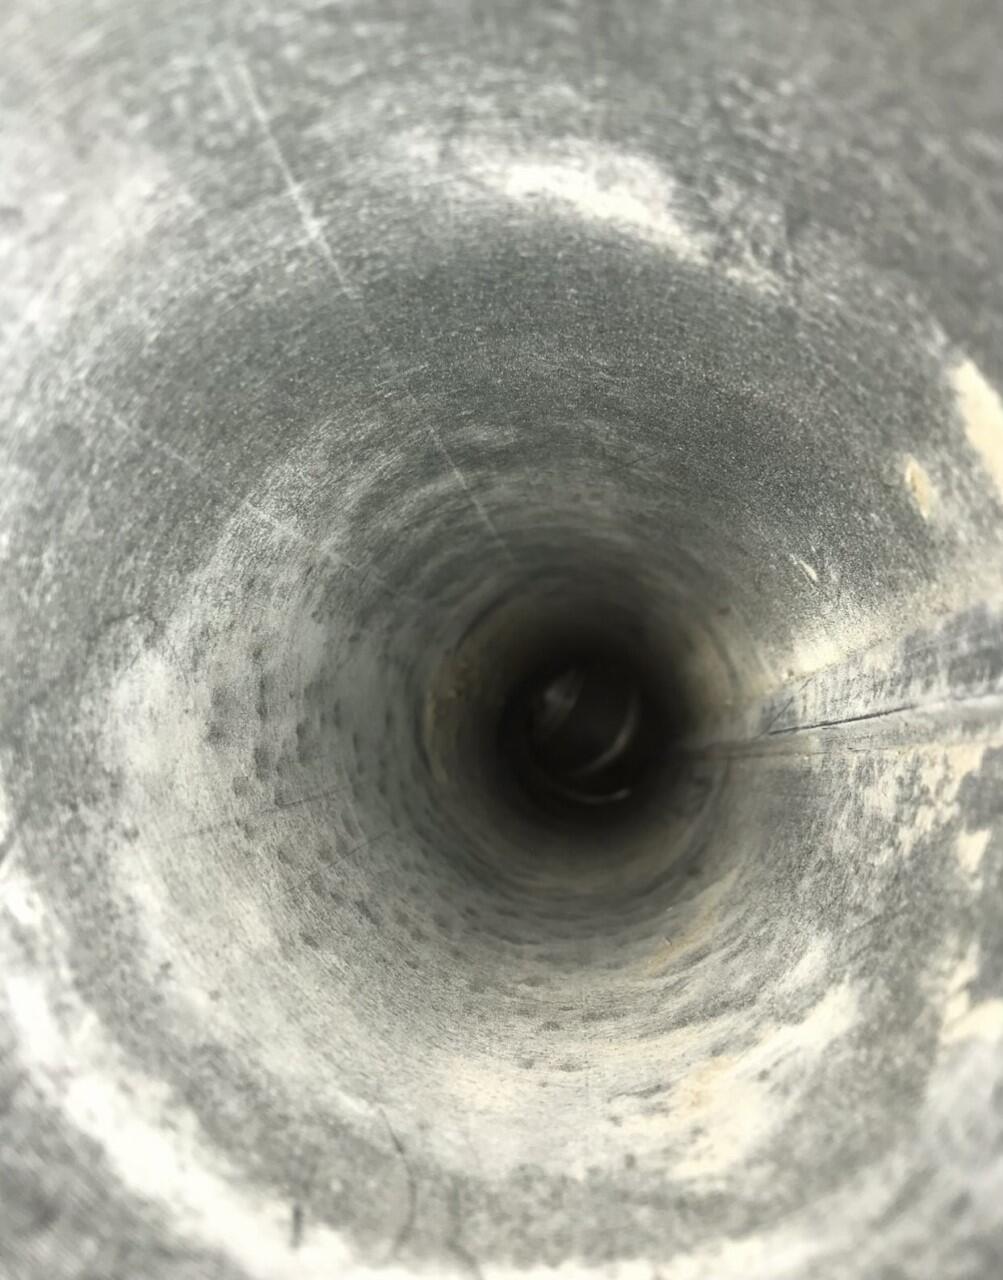 The Hidden Threat: Dryer Vent Fires and How to Prevent Them